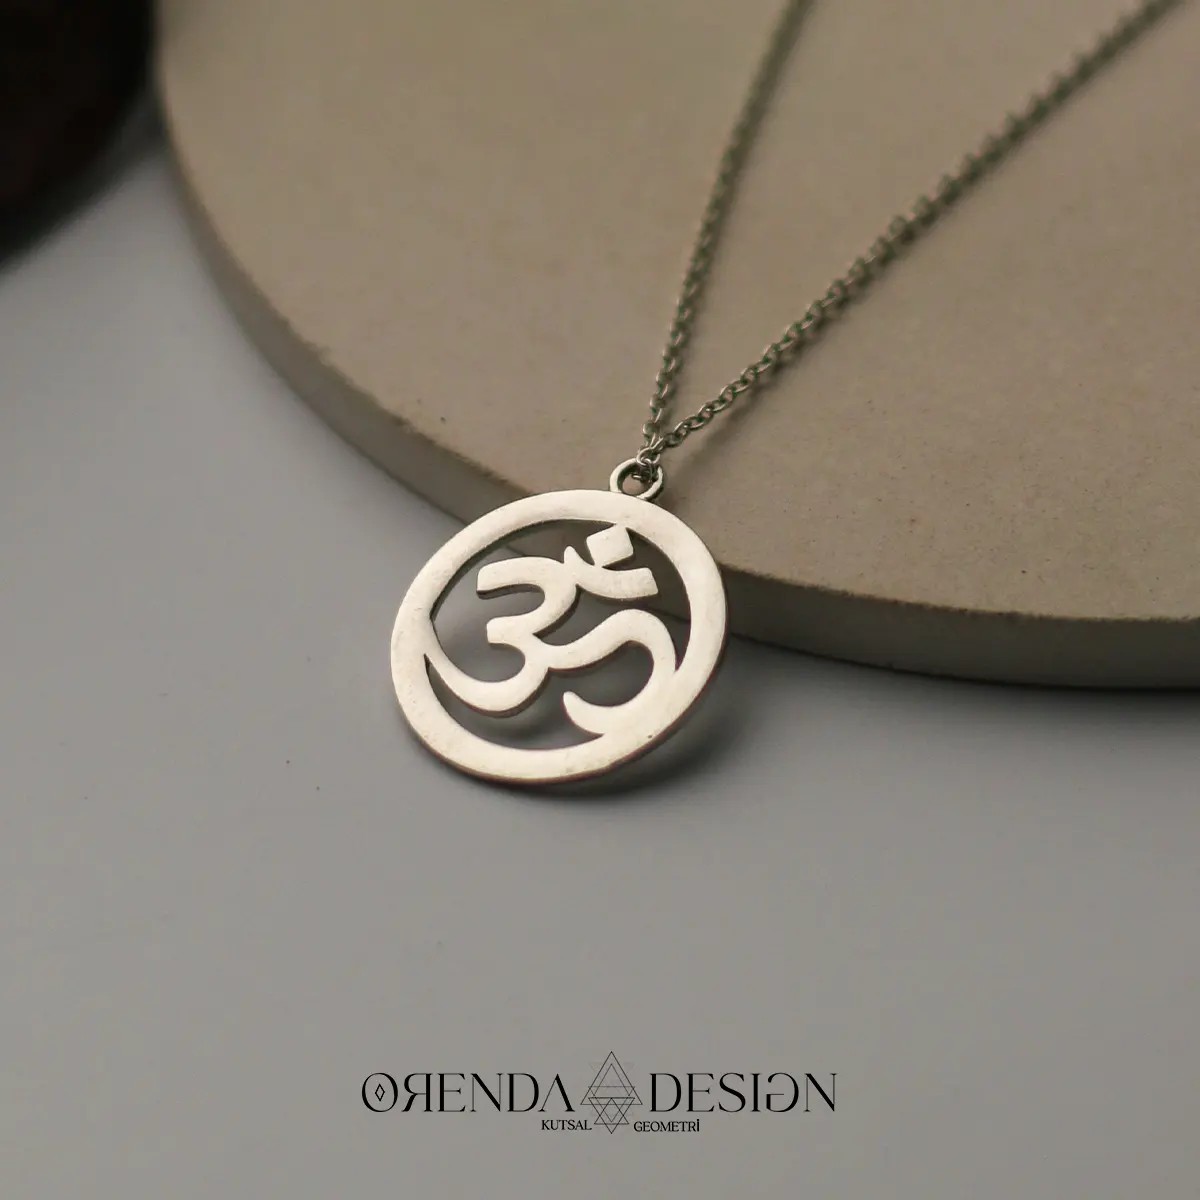 OM (AUM) Necklace - Silver